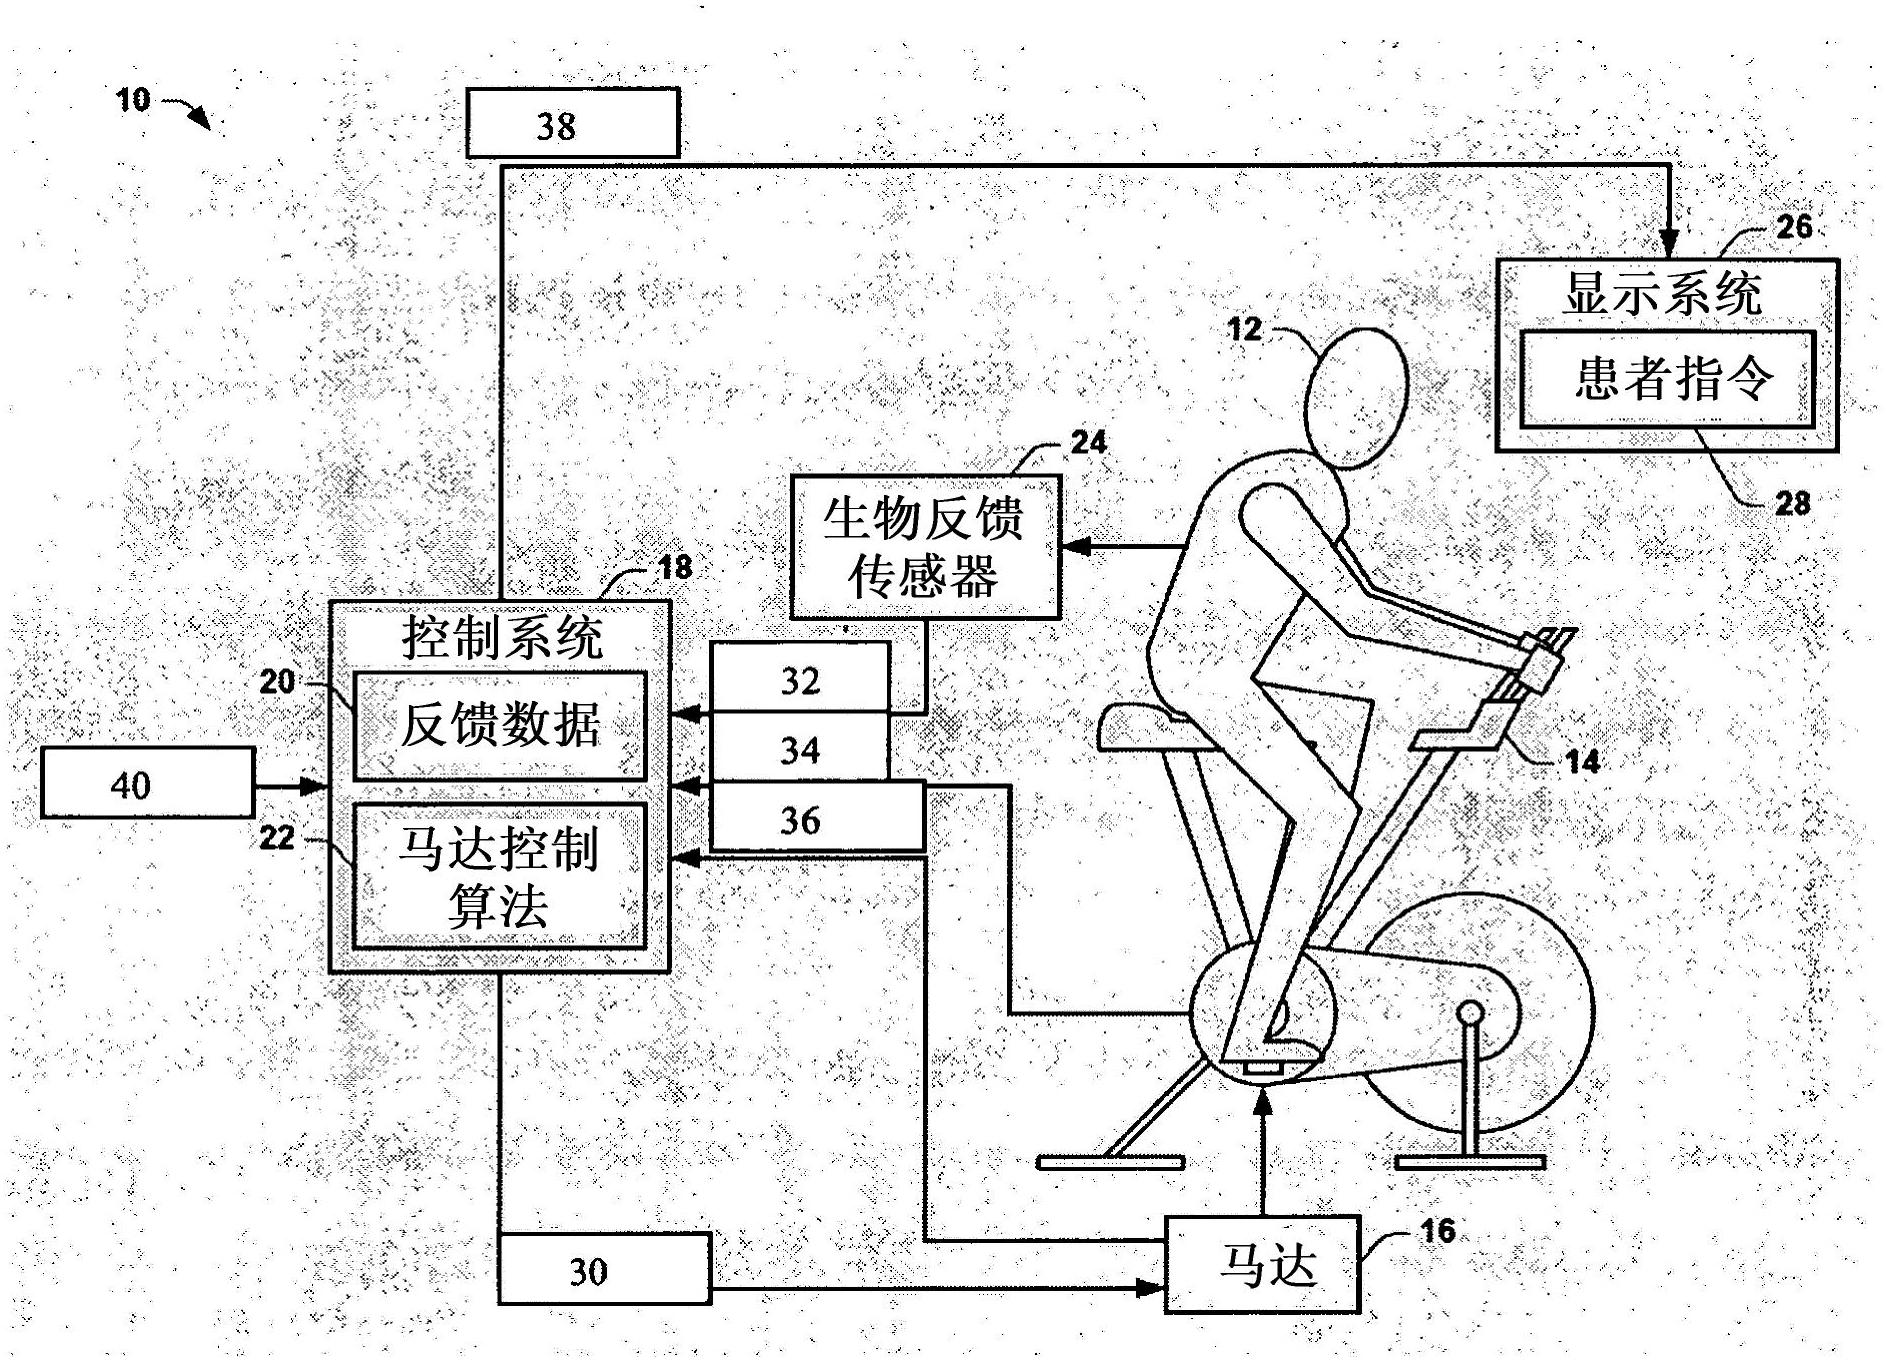 Systems and methods for improving motor function with assisted exercise